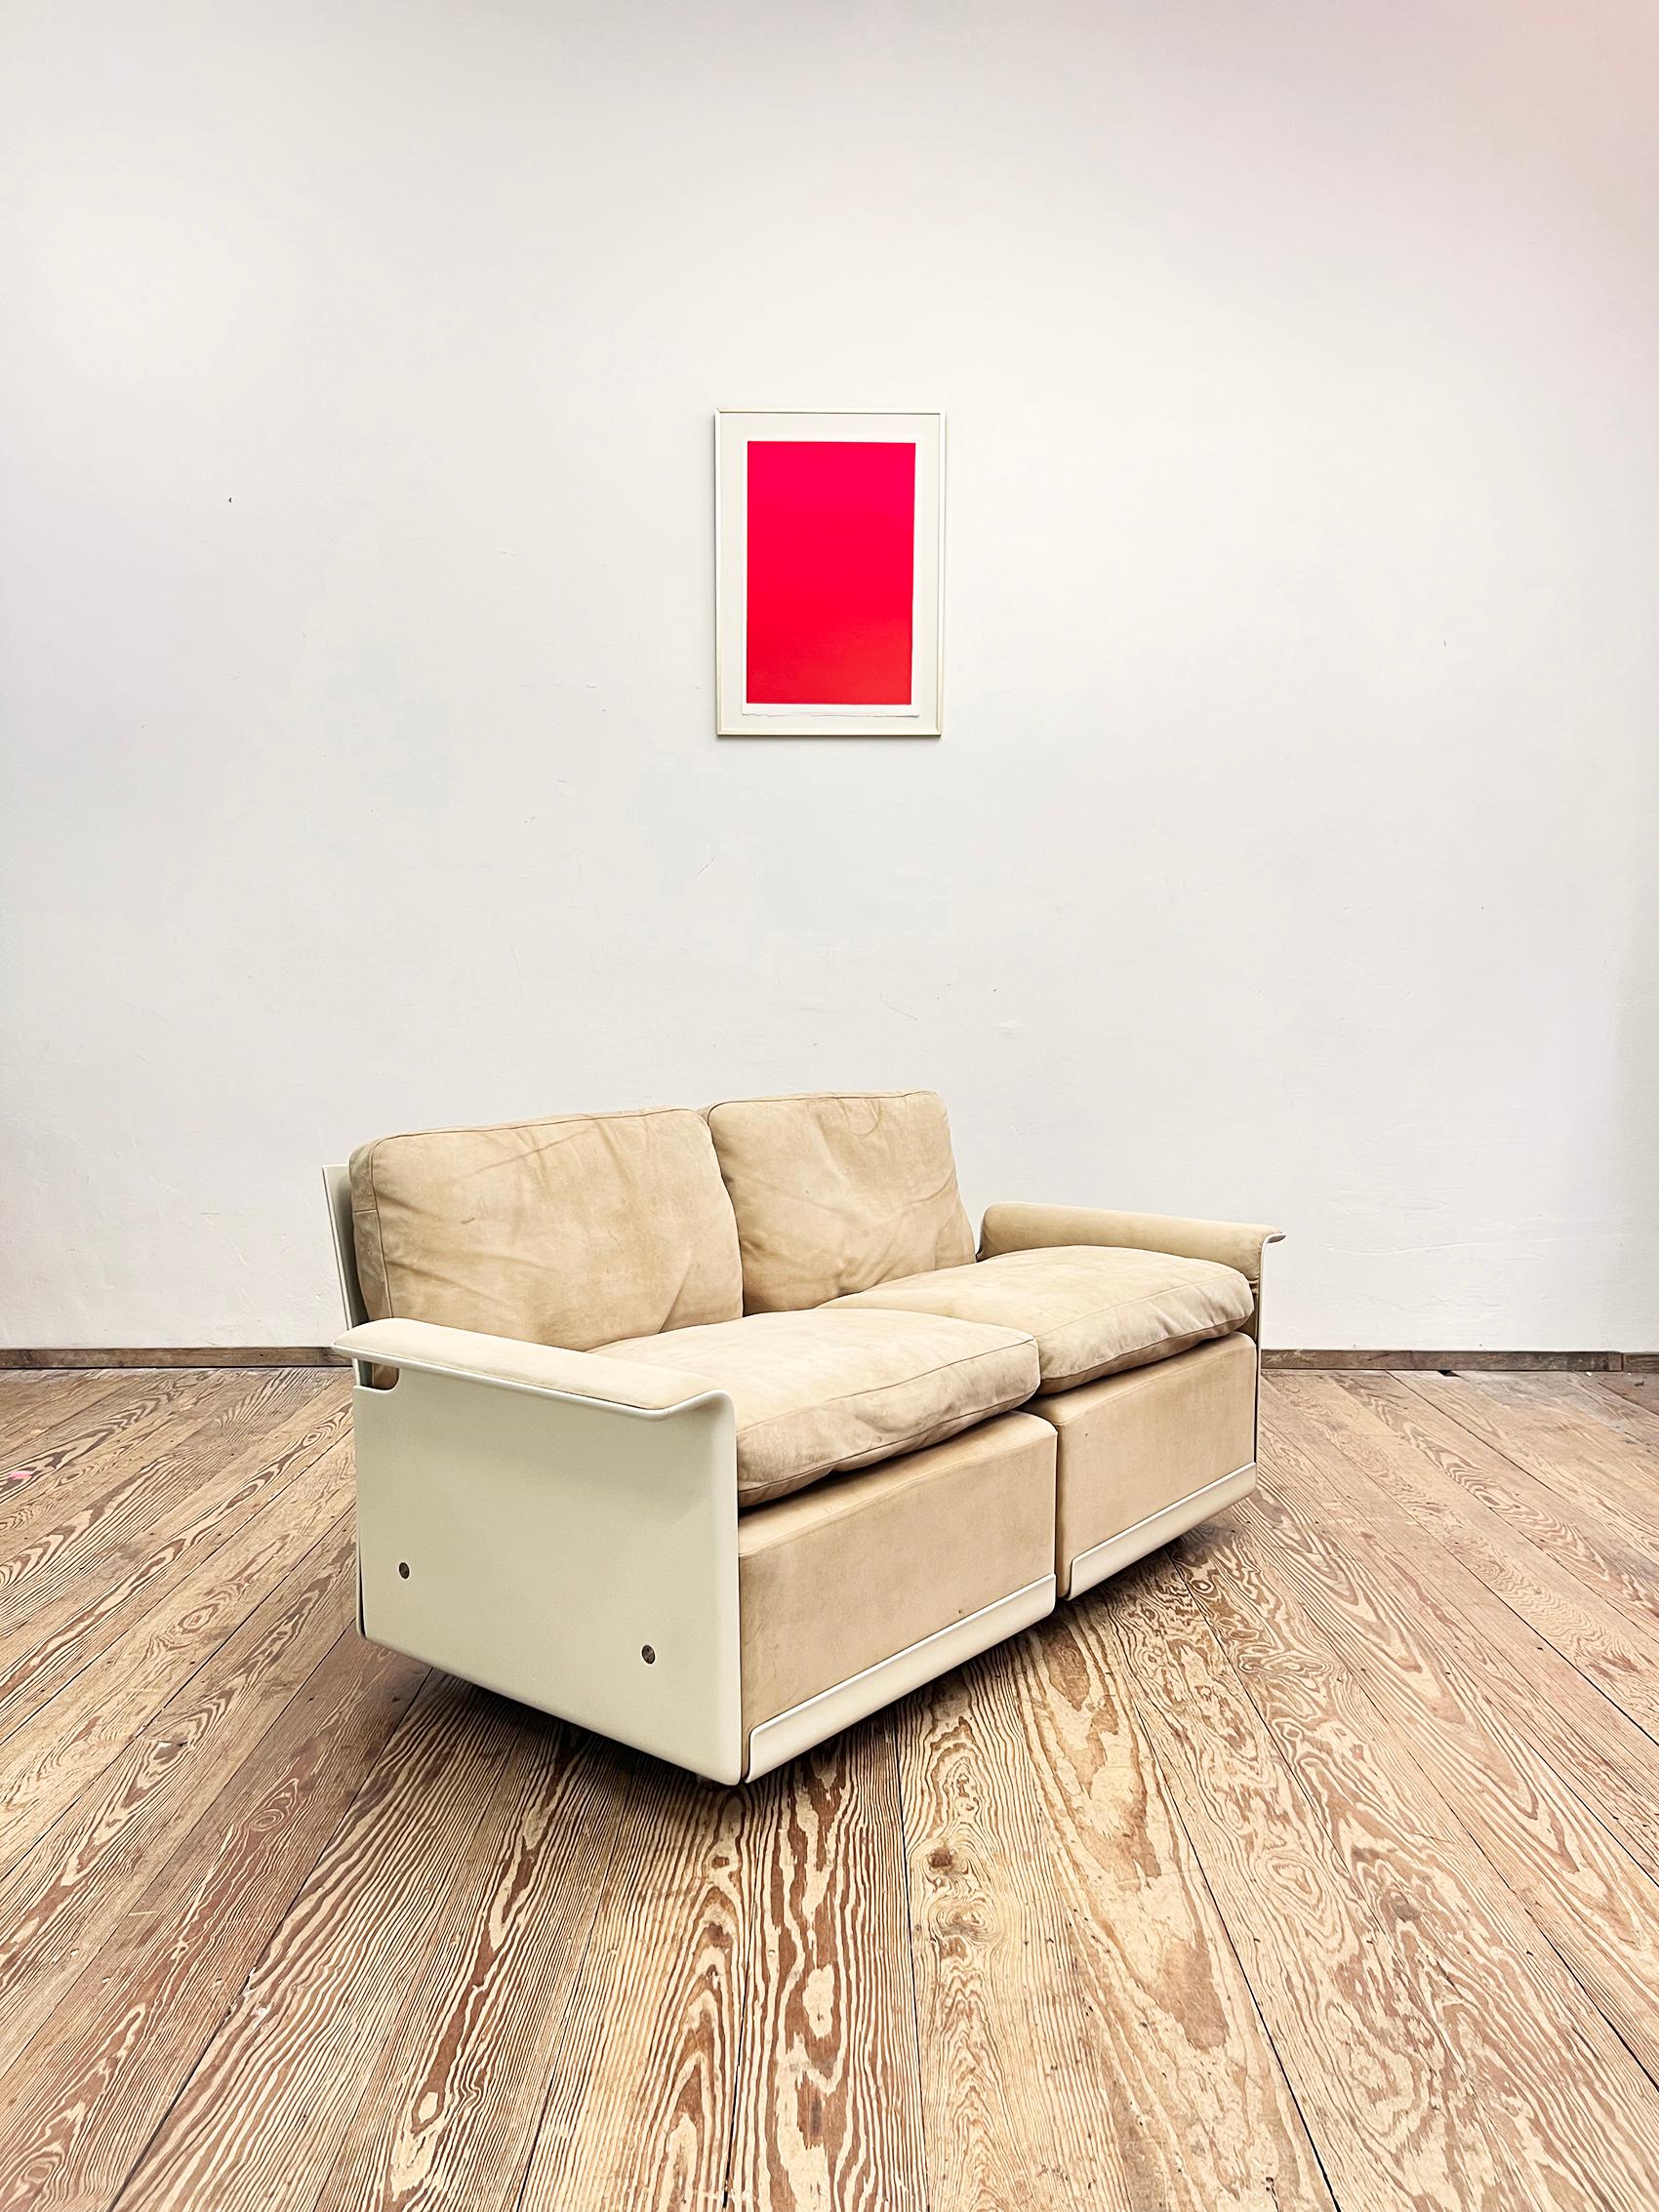 Mid-20th Century Mid-Century Lounge Sofa or Couch by Dieter Rams for Vitsoe, German Design, 1960s